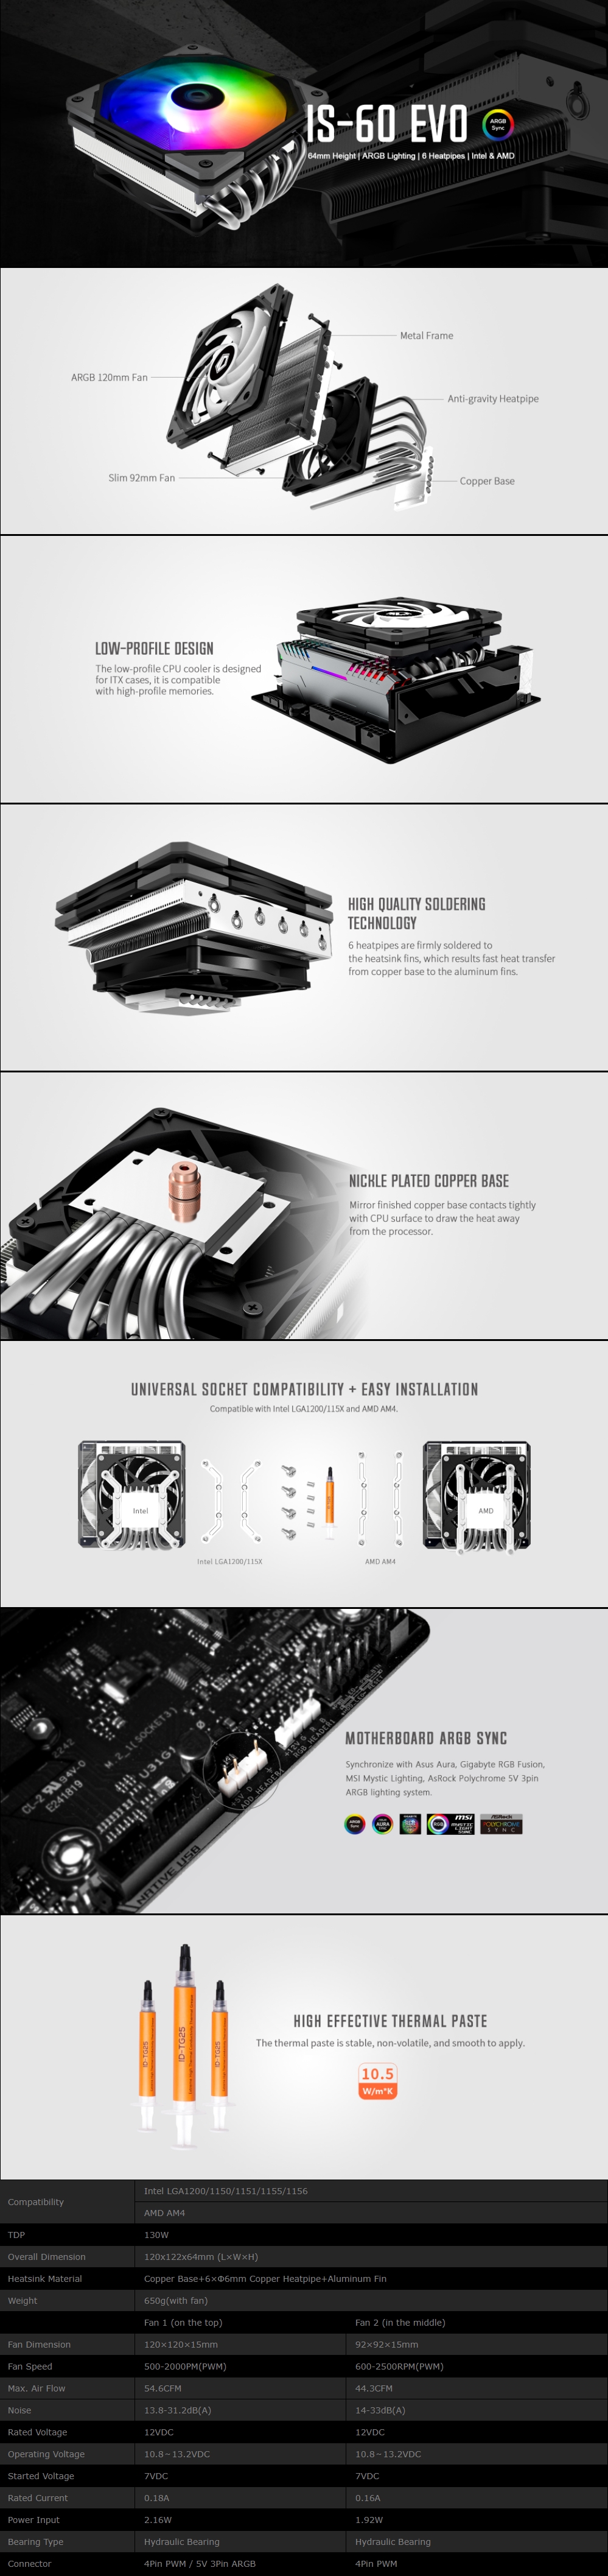 A large marketing image providing additional information about the product ID-COOLING Iceland Series IS-60 EVO ARGB Low Profile CPU Cooler - Additional alt info not provided